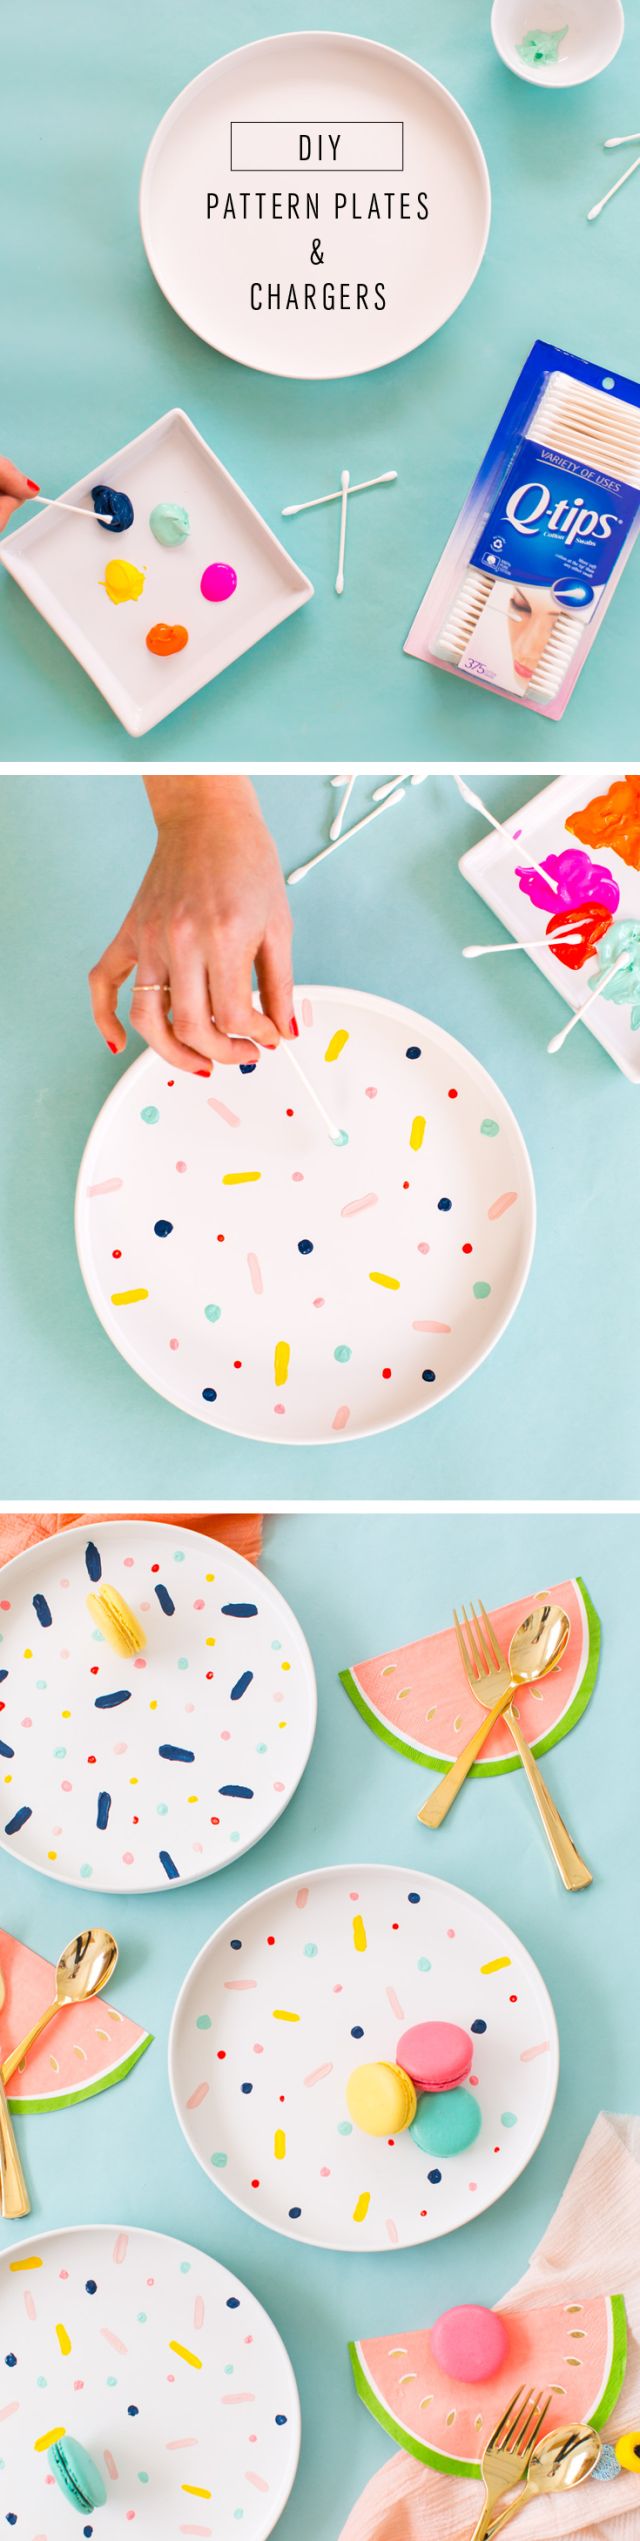 The perfect rainy afternoon craft project, DIY confett pattern placemats and cha...